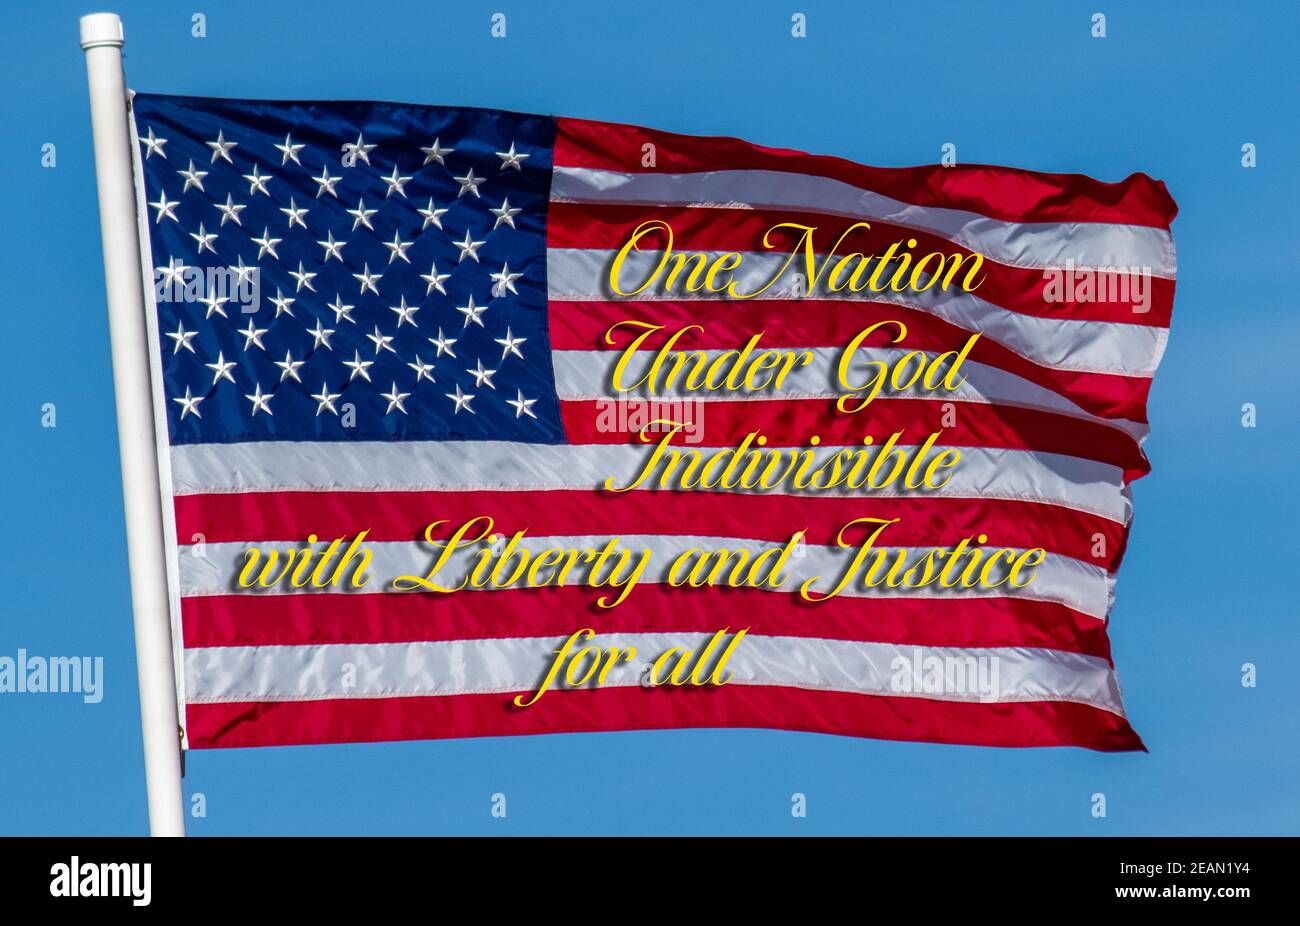 American flag for which it stands, one nation under god indivisible with liberty and justice for all, blue sky background pledge of allegiance Stock Photo